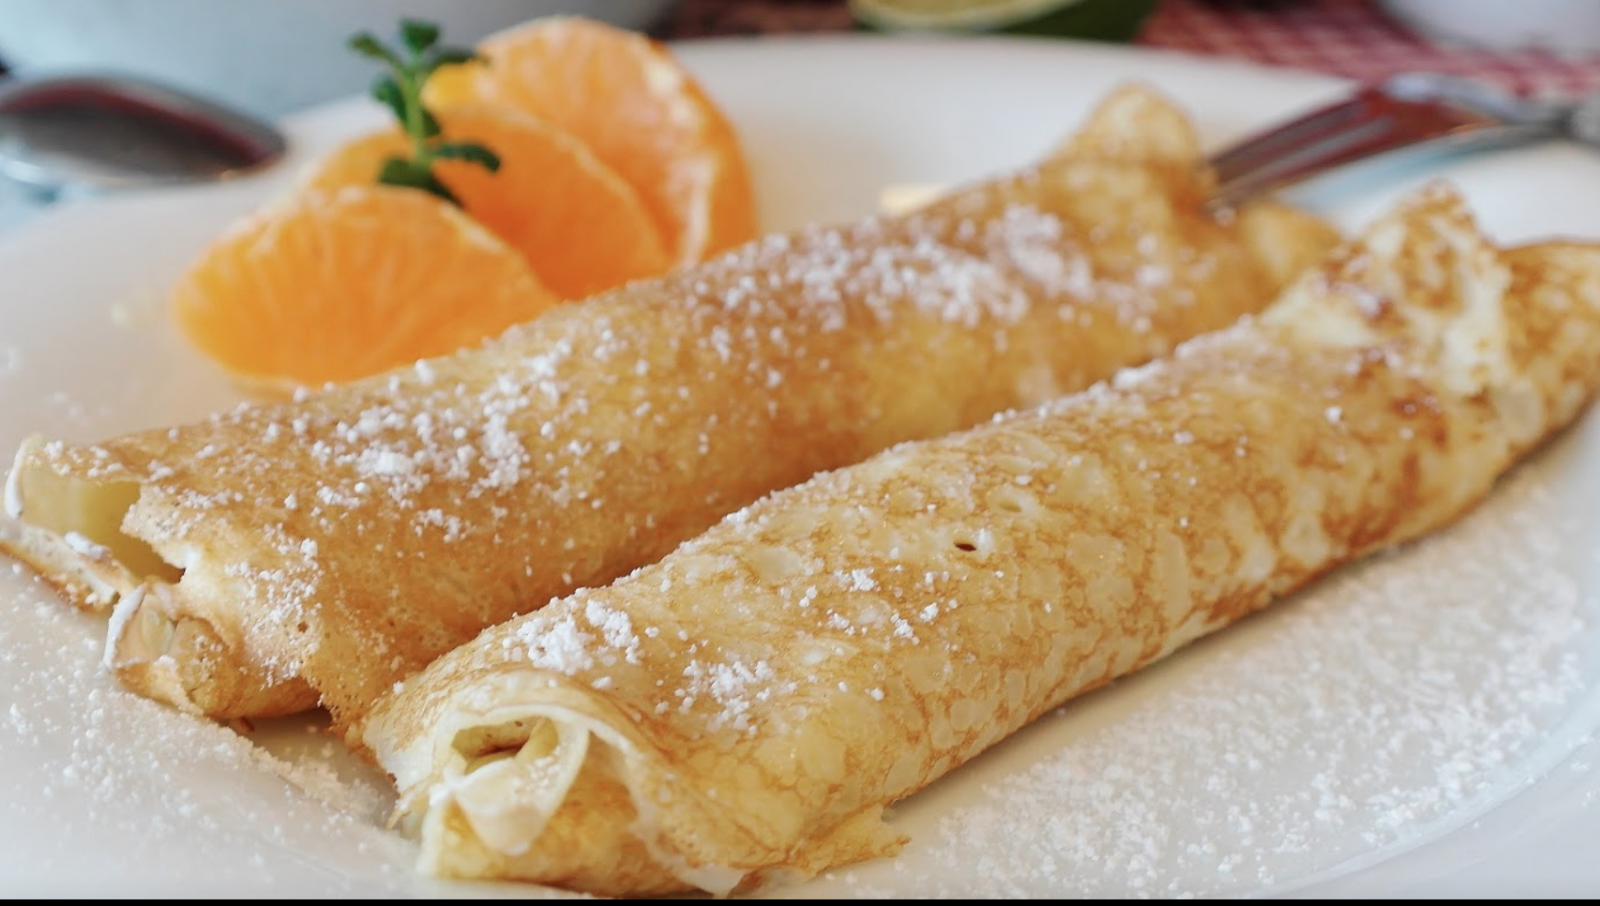 The Spicy Olive S Orange Creamsicle Crepes The Spicy Olive,Corian Countertops